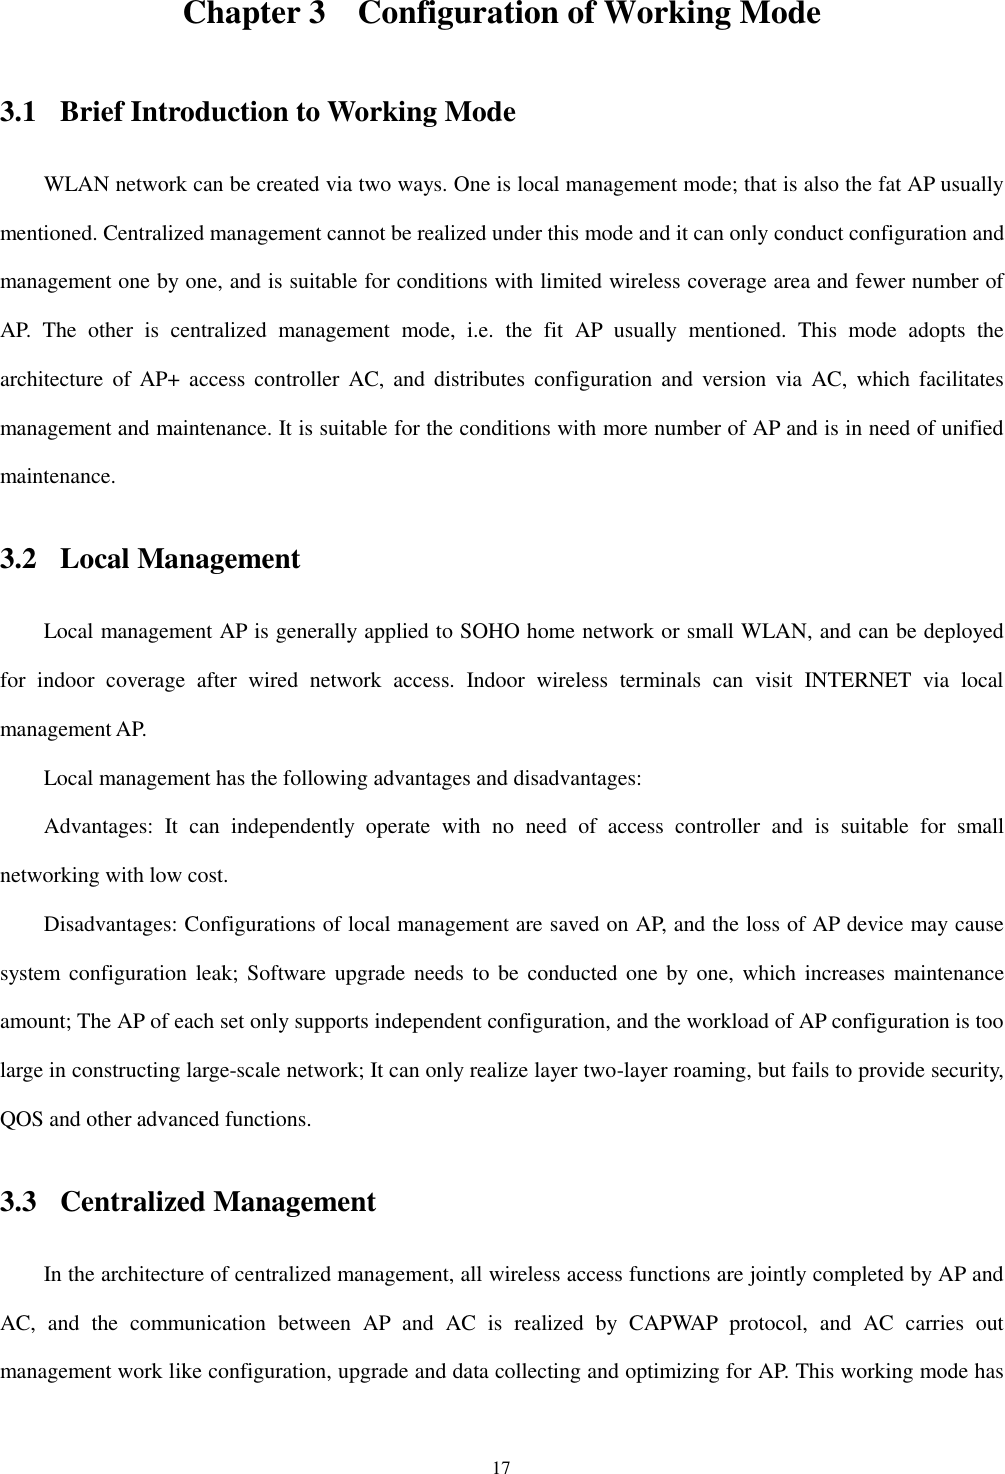 17 Chapter 3 Configuration of Working Mode 3.1 Brief Introduction to Working Mode WLAN network can be created via two ways. One is local management mode; that is also the fat AP usually mentioned. Centralized management cannot be realized under this mode and it can only conduct configuration and management one by one, and is suitable for conditions with limited wireless coverage area and fewer number of AP.  The  other  is  centralized  management  mode,  i.e.  the  fit  AP  usually  mentioned.  This  mode  adopts  the architecture  of  AP+  access controller  AC,  and  distributes  configuration  and  version  via  AC,  which facilitates management and maintenance. It is suitable for the conditions with more number of AP and is in need of unified maintenance.   3.2 Local Management Local management AP is generally applied to SOHO home network or small WLAN, and can be deployed for  indoor  coverage  after  wired  network  access.  Indoor  wireless  terminals  can  visit  INTERNET  via  local management AP.   Local management has the following advantages and disadvantages:   Advantages:  It  can  independently  operate  with  no  need  of  access  controller  and  is  suitable  for  small networking with low cost.   Disadvantages: Configurations of local management are saved on AP, and the loss of AP device may cause system  configuration  leak; Software upgrade needs  to be conducted one by one,  which increases maintenance amount; The AP of each set only supports independent configuration, and the workload of AP configuration is too large in constructing large-scale network; It can only realize layer two-layer roaming, but fails to provide security, QOS and other advanced functions.   3.3 Centralized Management In the architecture of centralized management, all wireless access functions are jointly completed by AP and AC,  and  the  communication  between  AP  and  AC  is  realized  by  CAPWAP  protocol,  and  AC  carries  out management work like configuration, upgrade and data collecting and optimizing for AP. This working mode has 